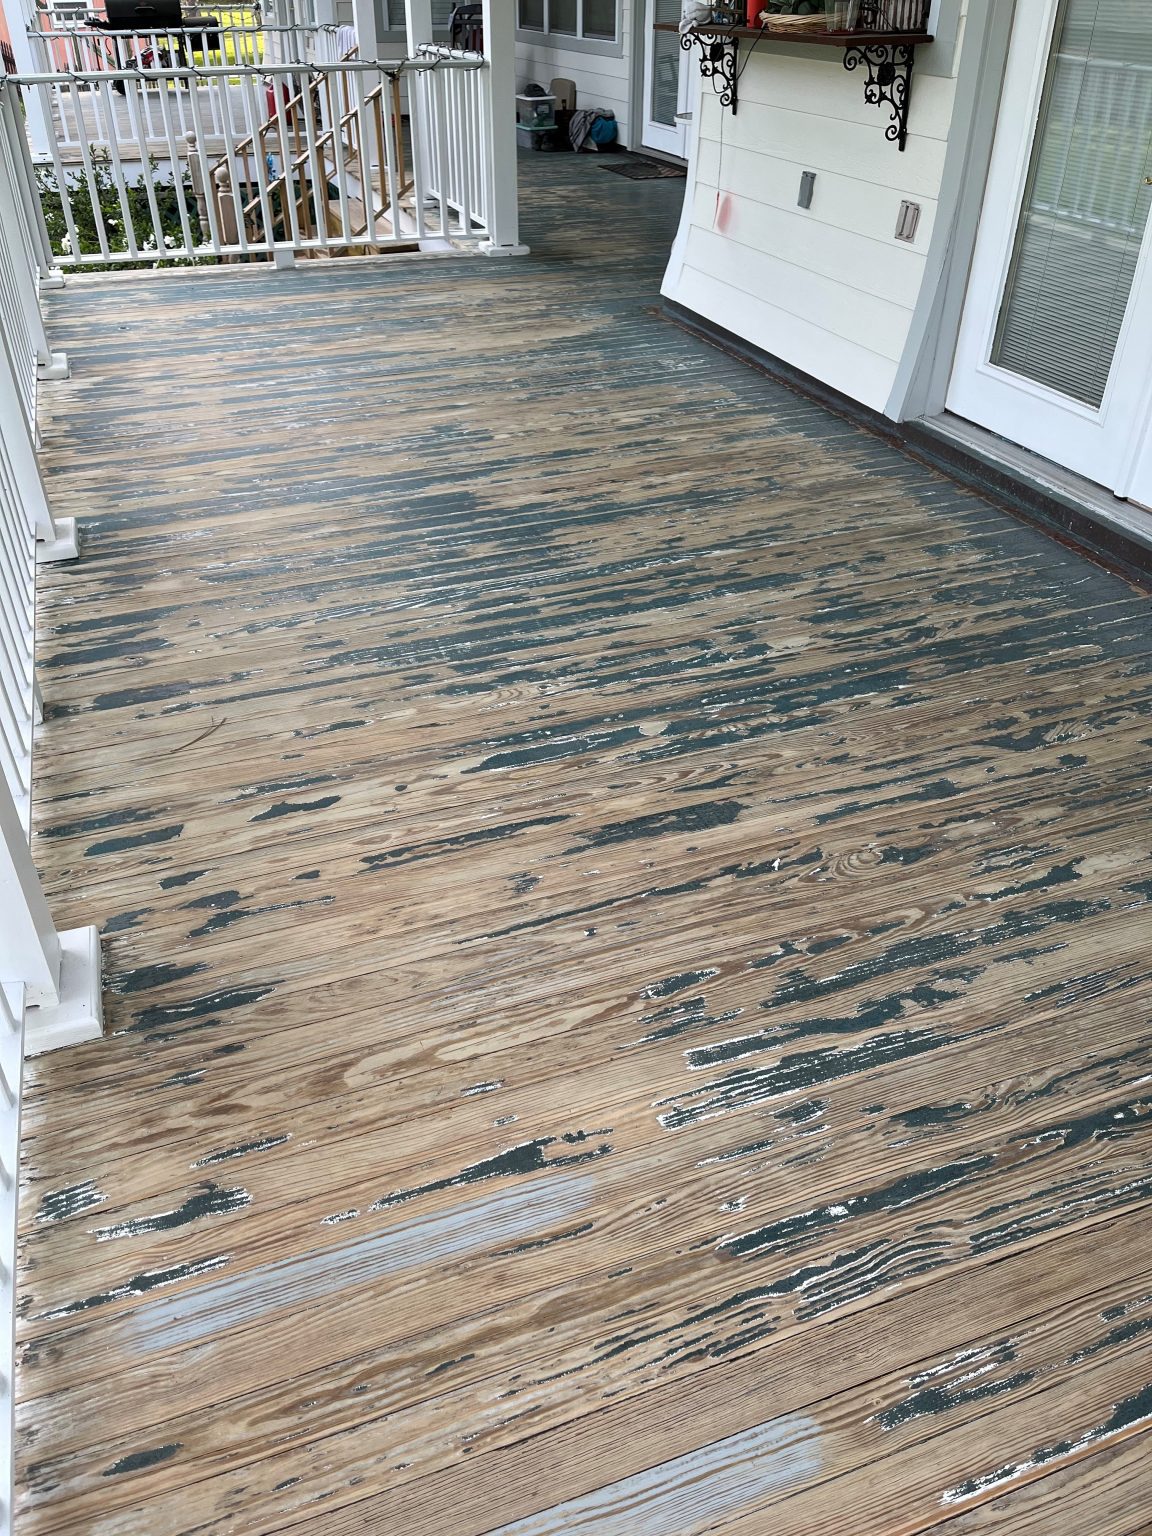 back deck after being stained and painted